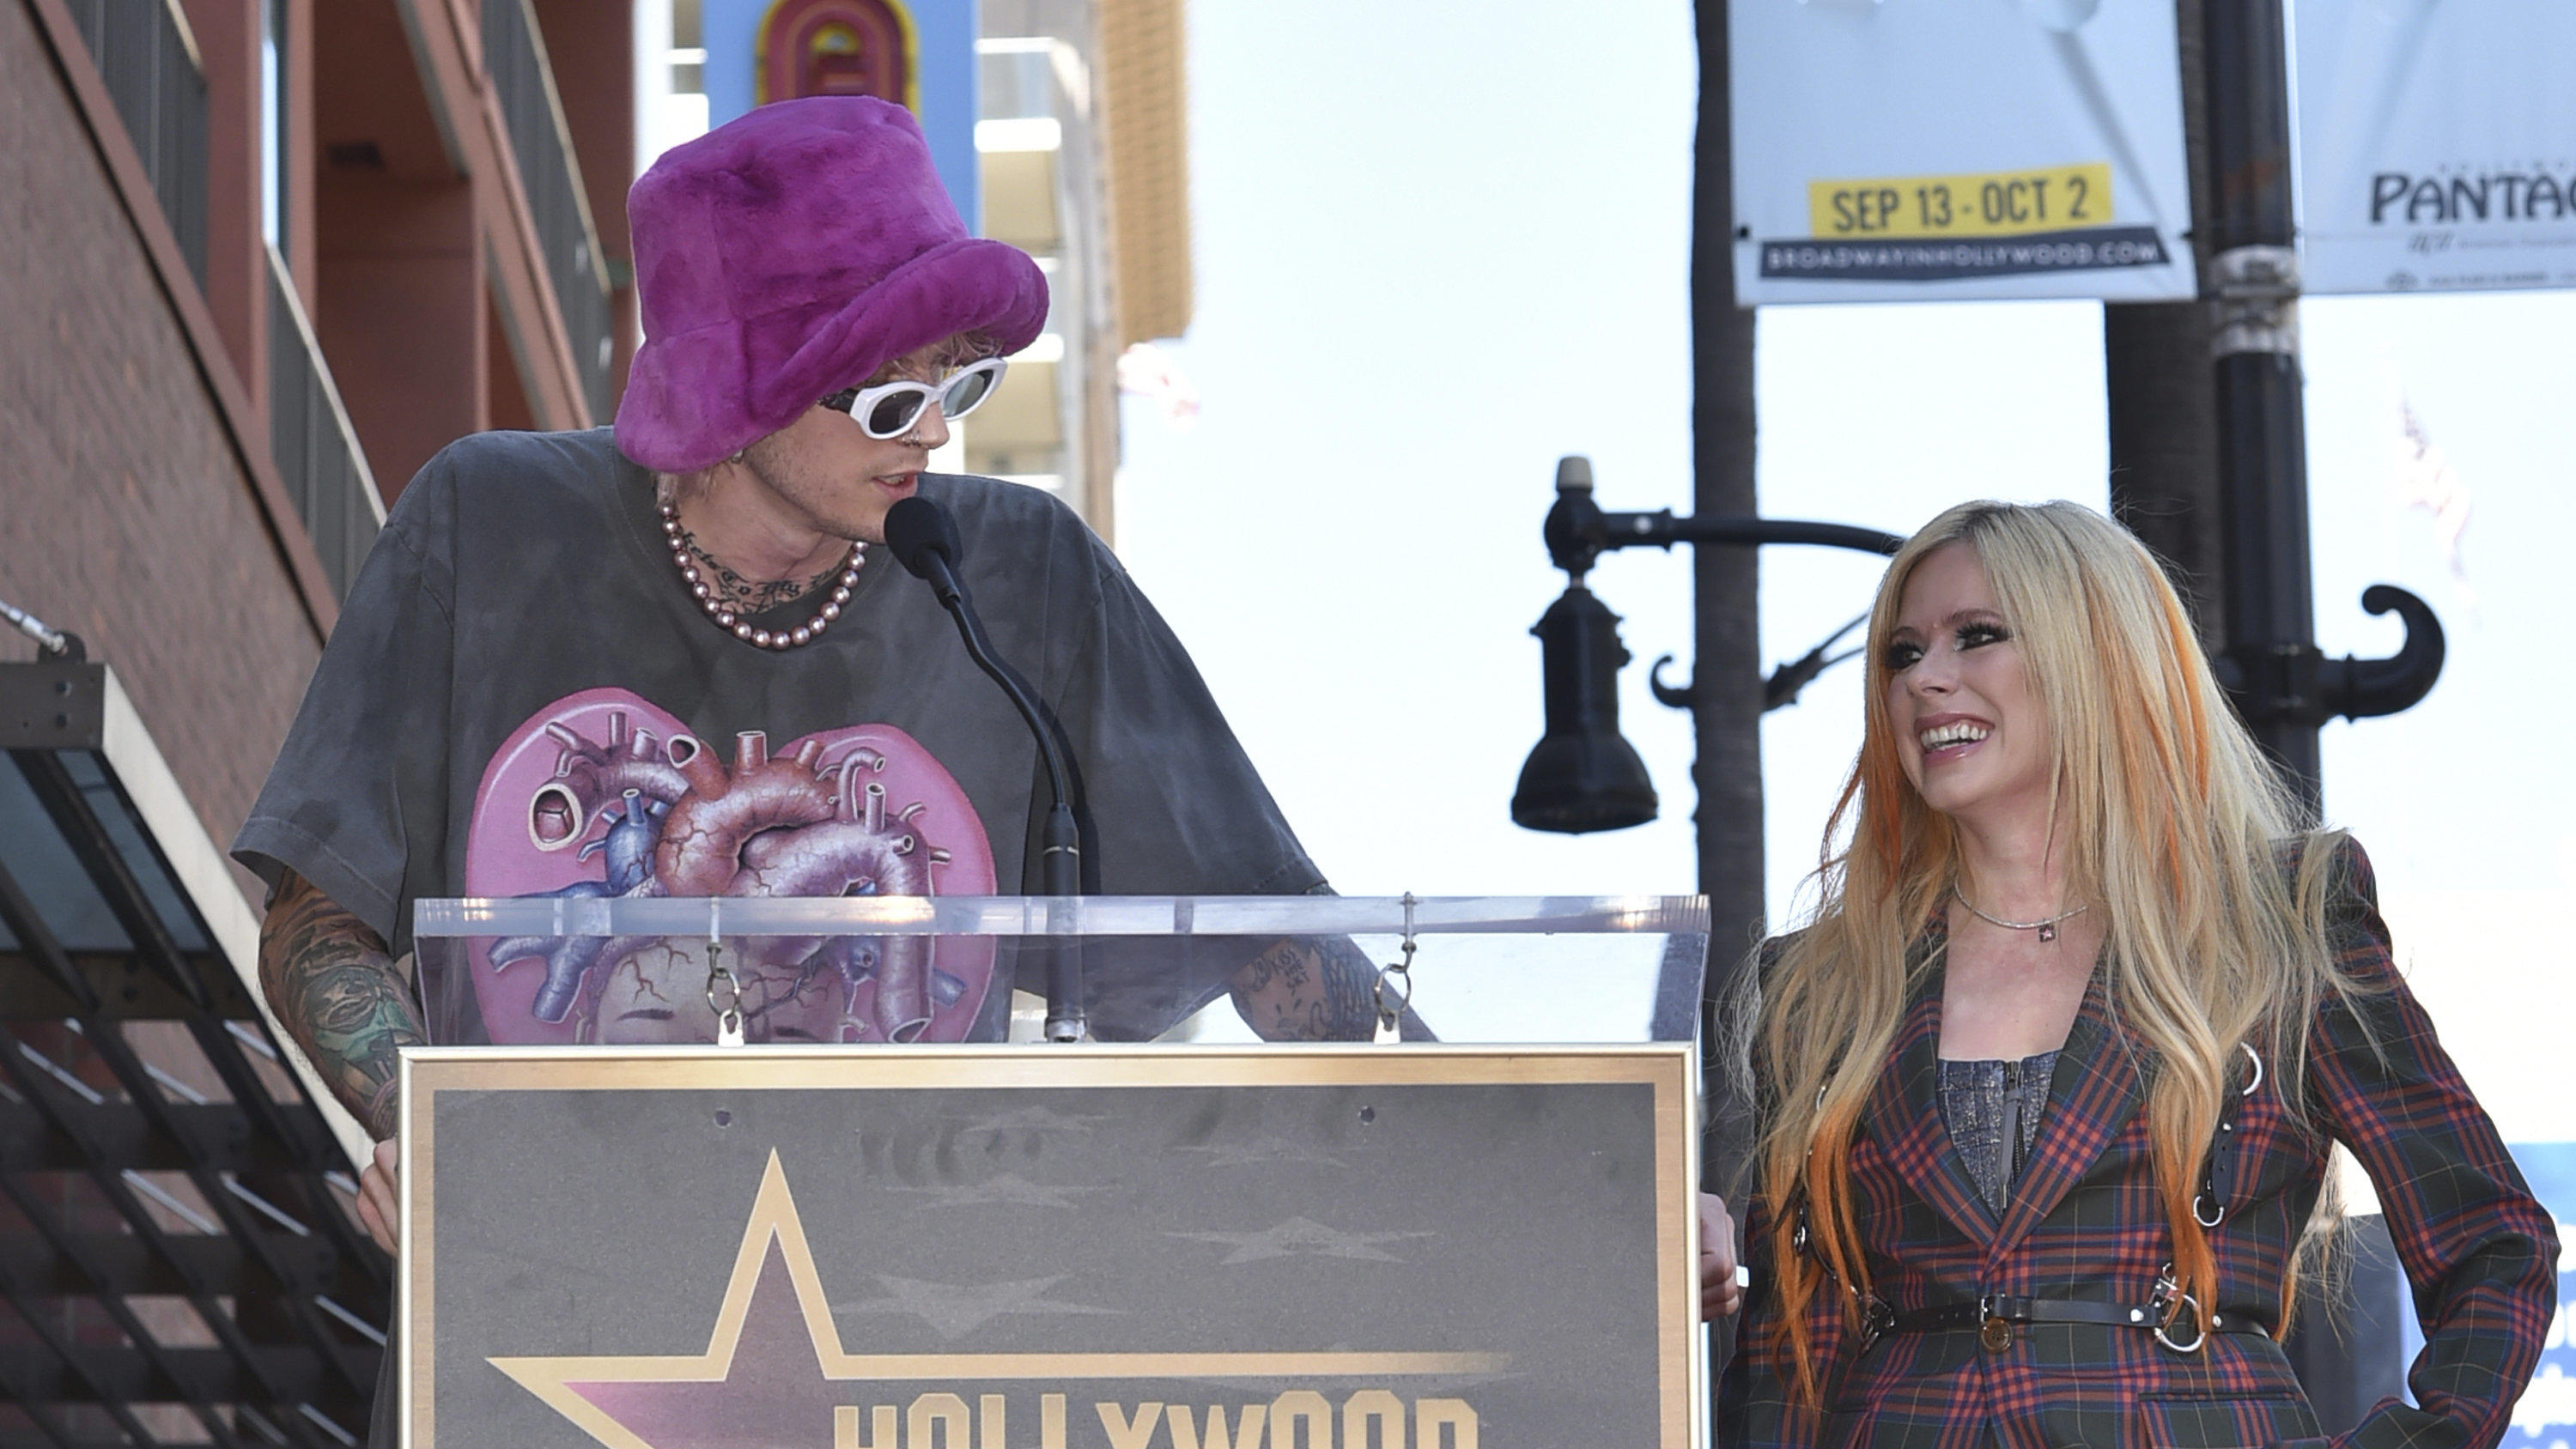 Machine Gun Kelly speaks as singer Avril Lavigne, known for her hits "Complicated" and "I'm with You," looks on during ceremony honoring Lavigne with a star on the Hollywood Walk of Fame on Wednesday, Aug. 31, 2022 in Los Angeles. (Photo by Richard S